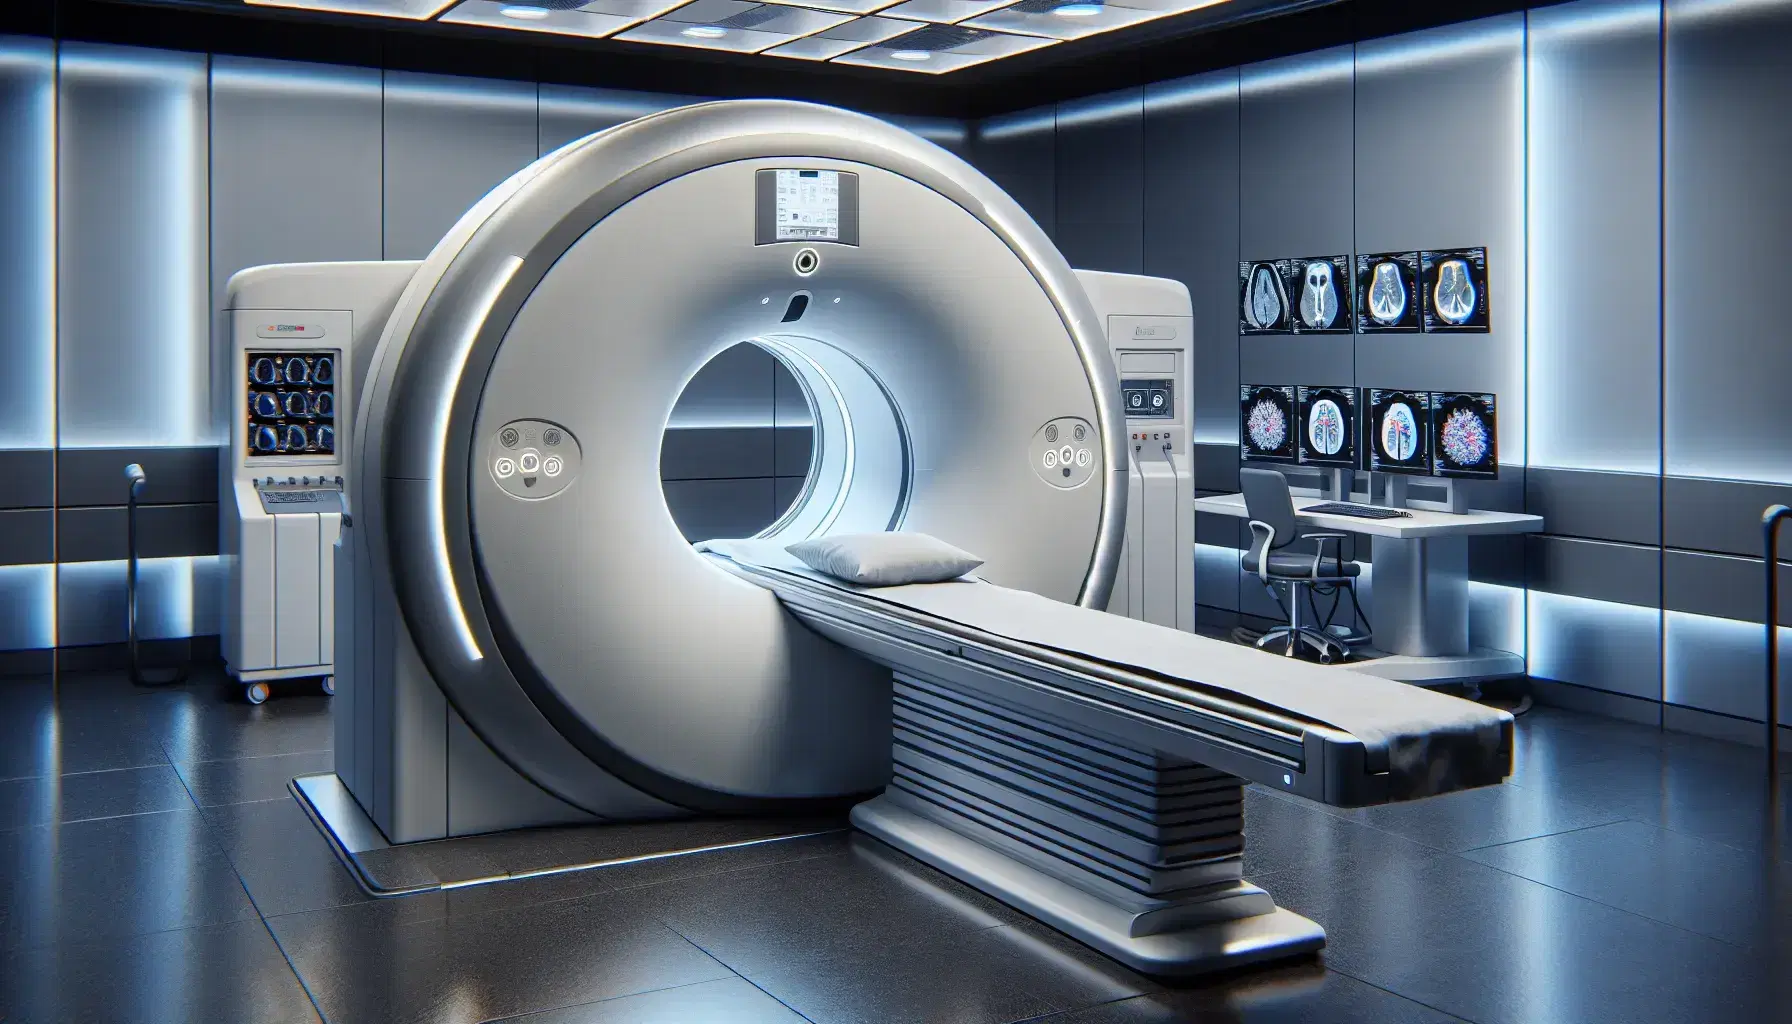 Modern medical imaging room with white and gray CT scanner and metallic PET machine, technology console and healthcare professional.